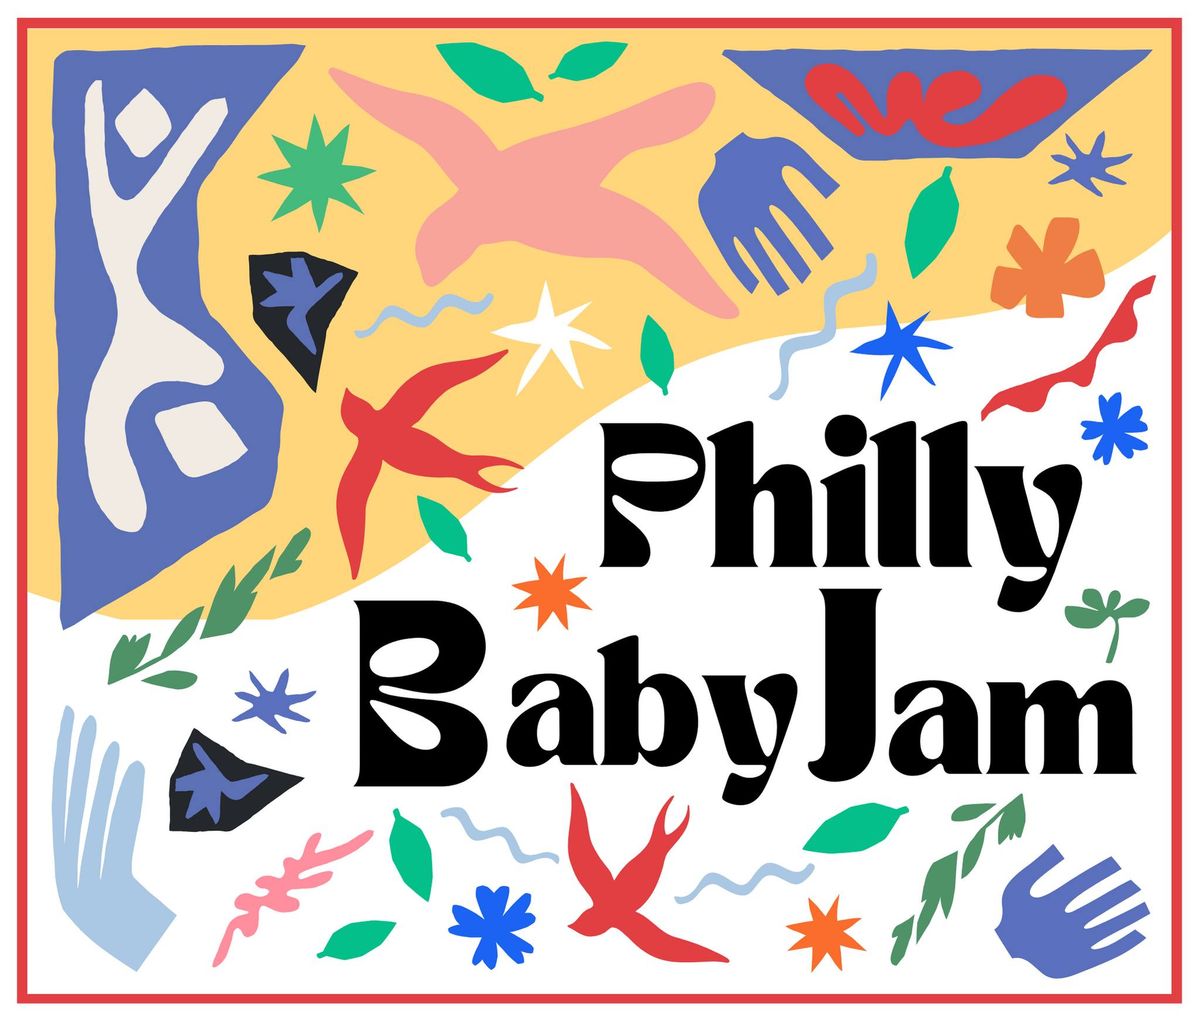 Philly Baby Jam